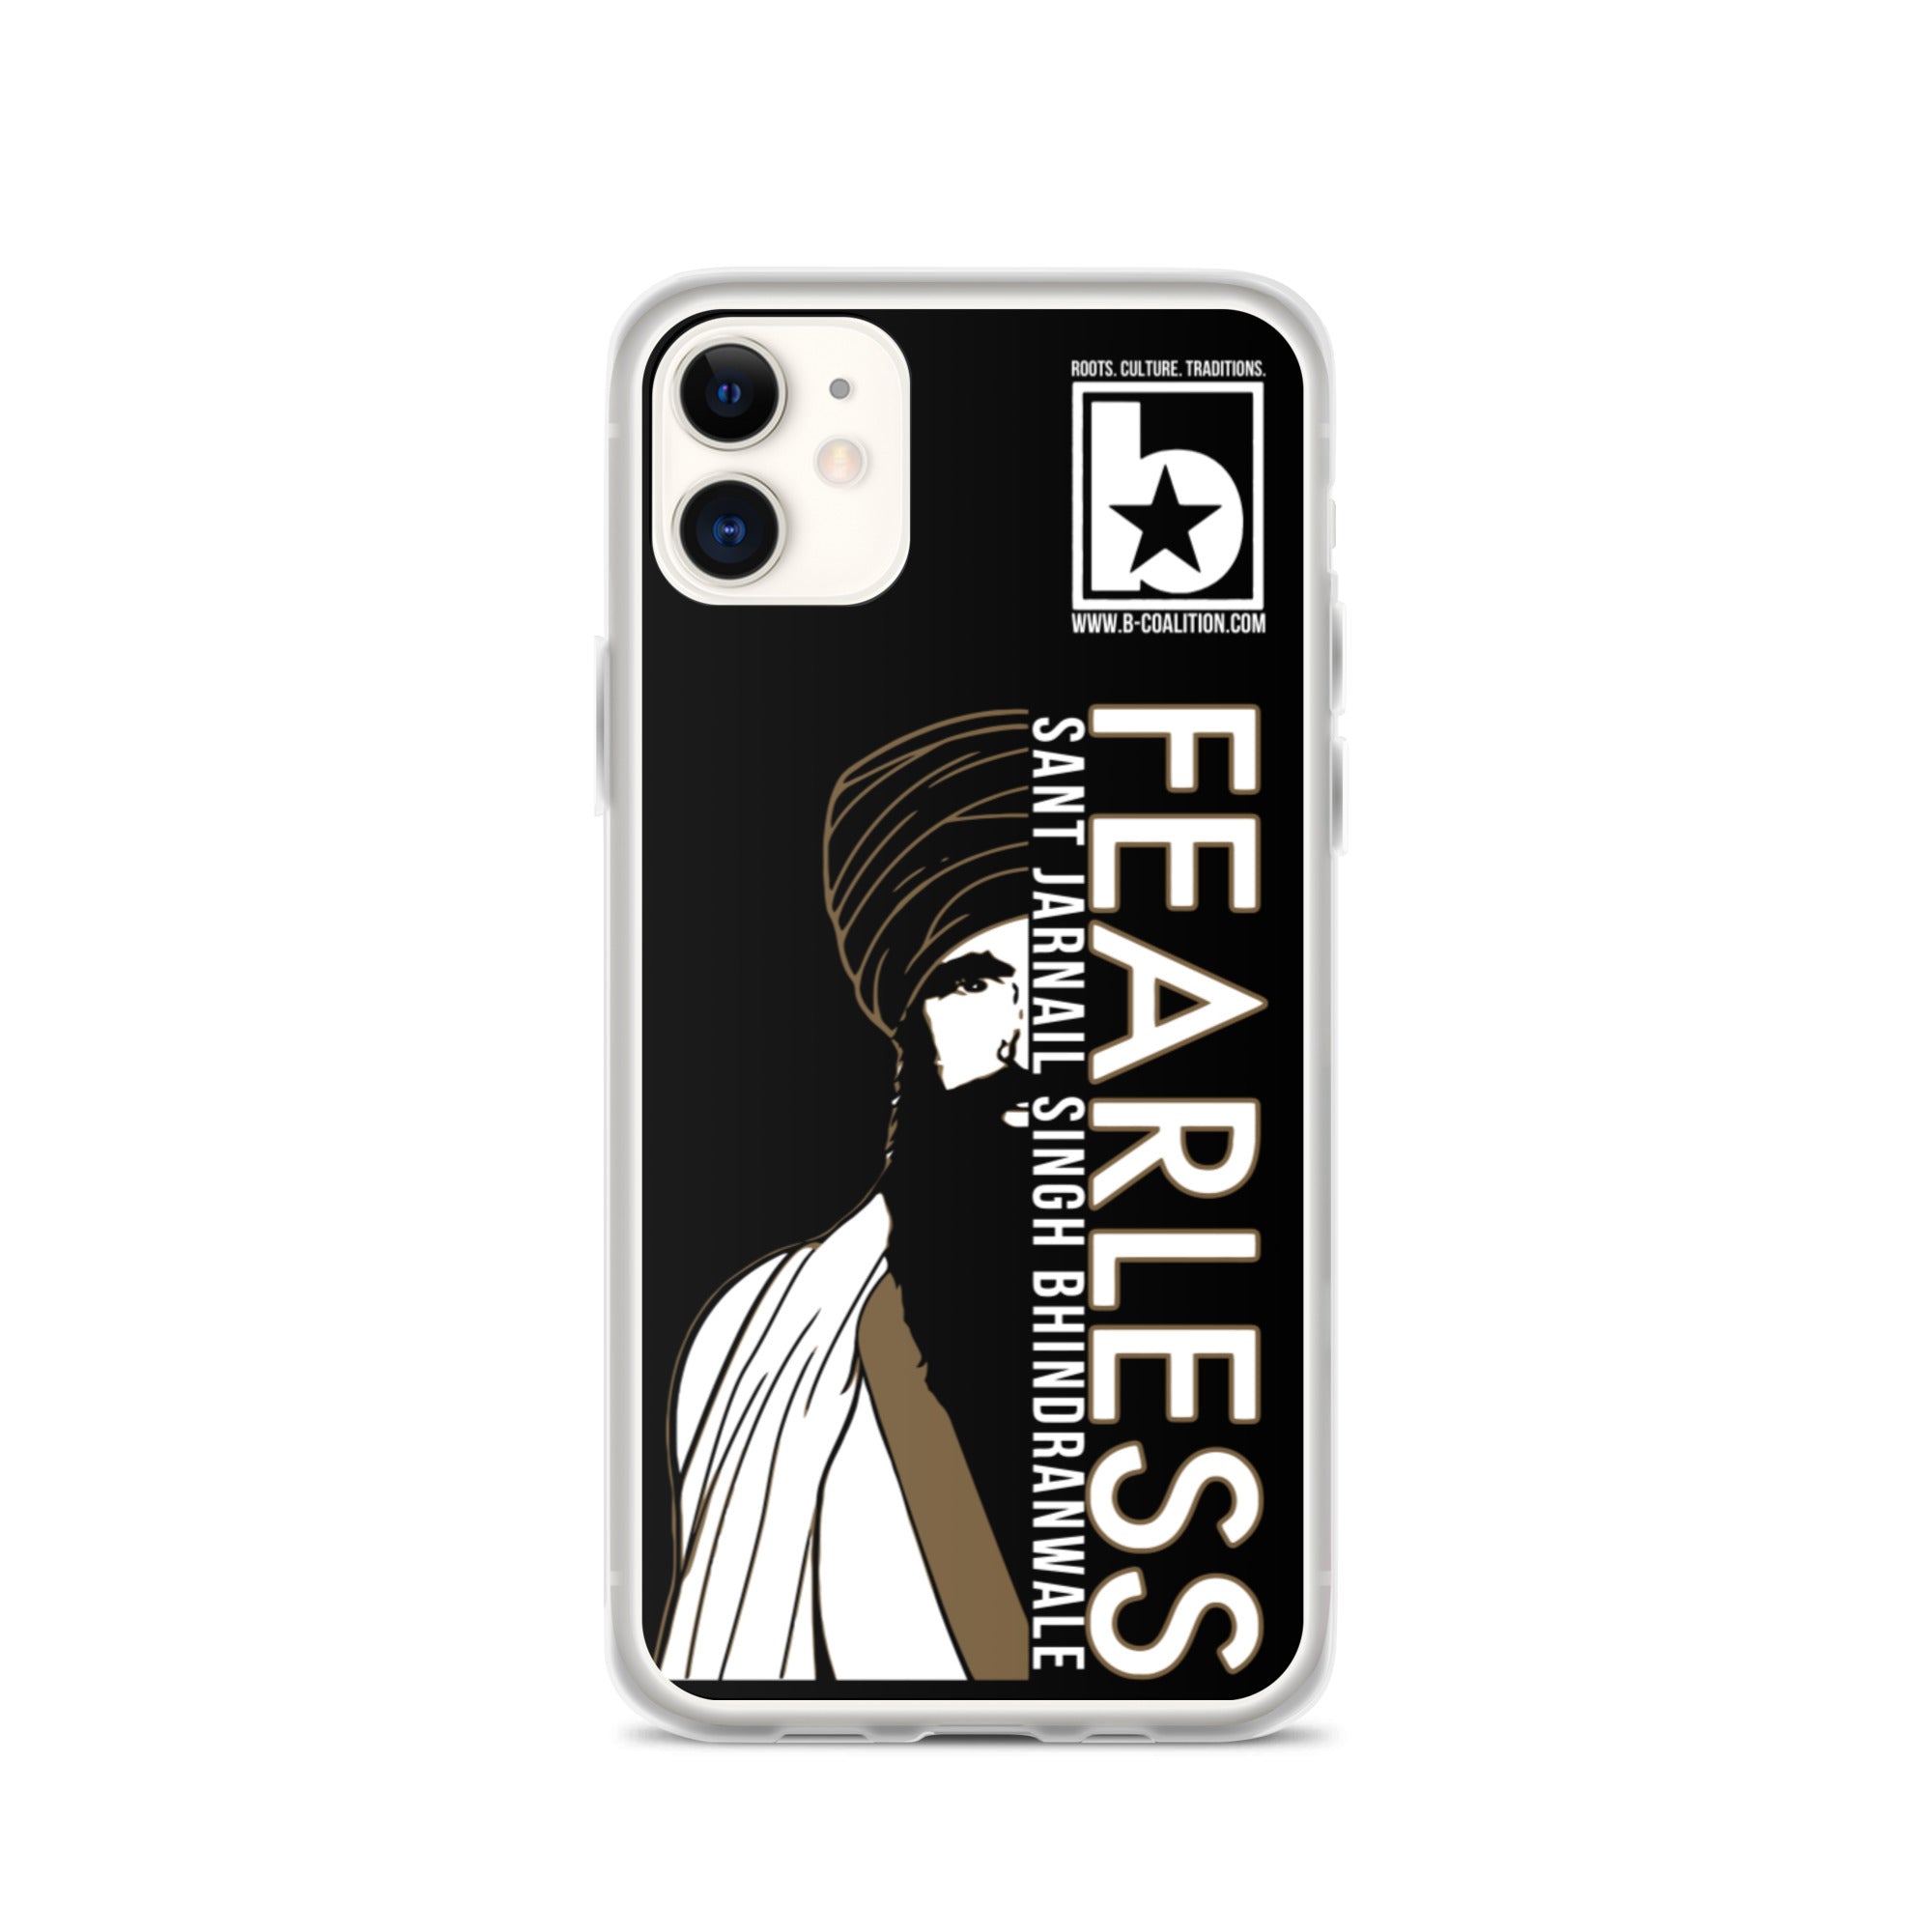 Fearless - Jarnail Singh Bhindranwale iPhone Case - B-Coalition Clothing Company